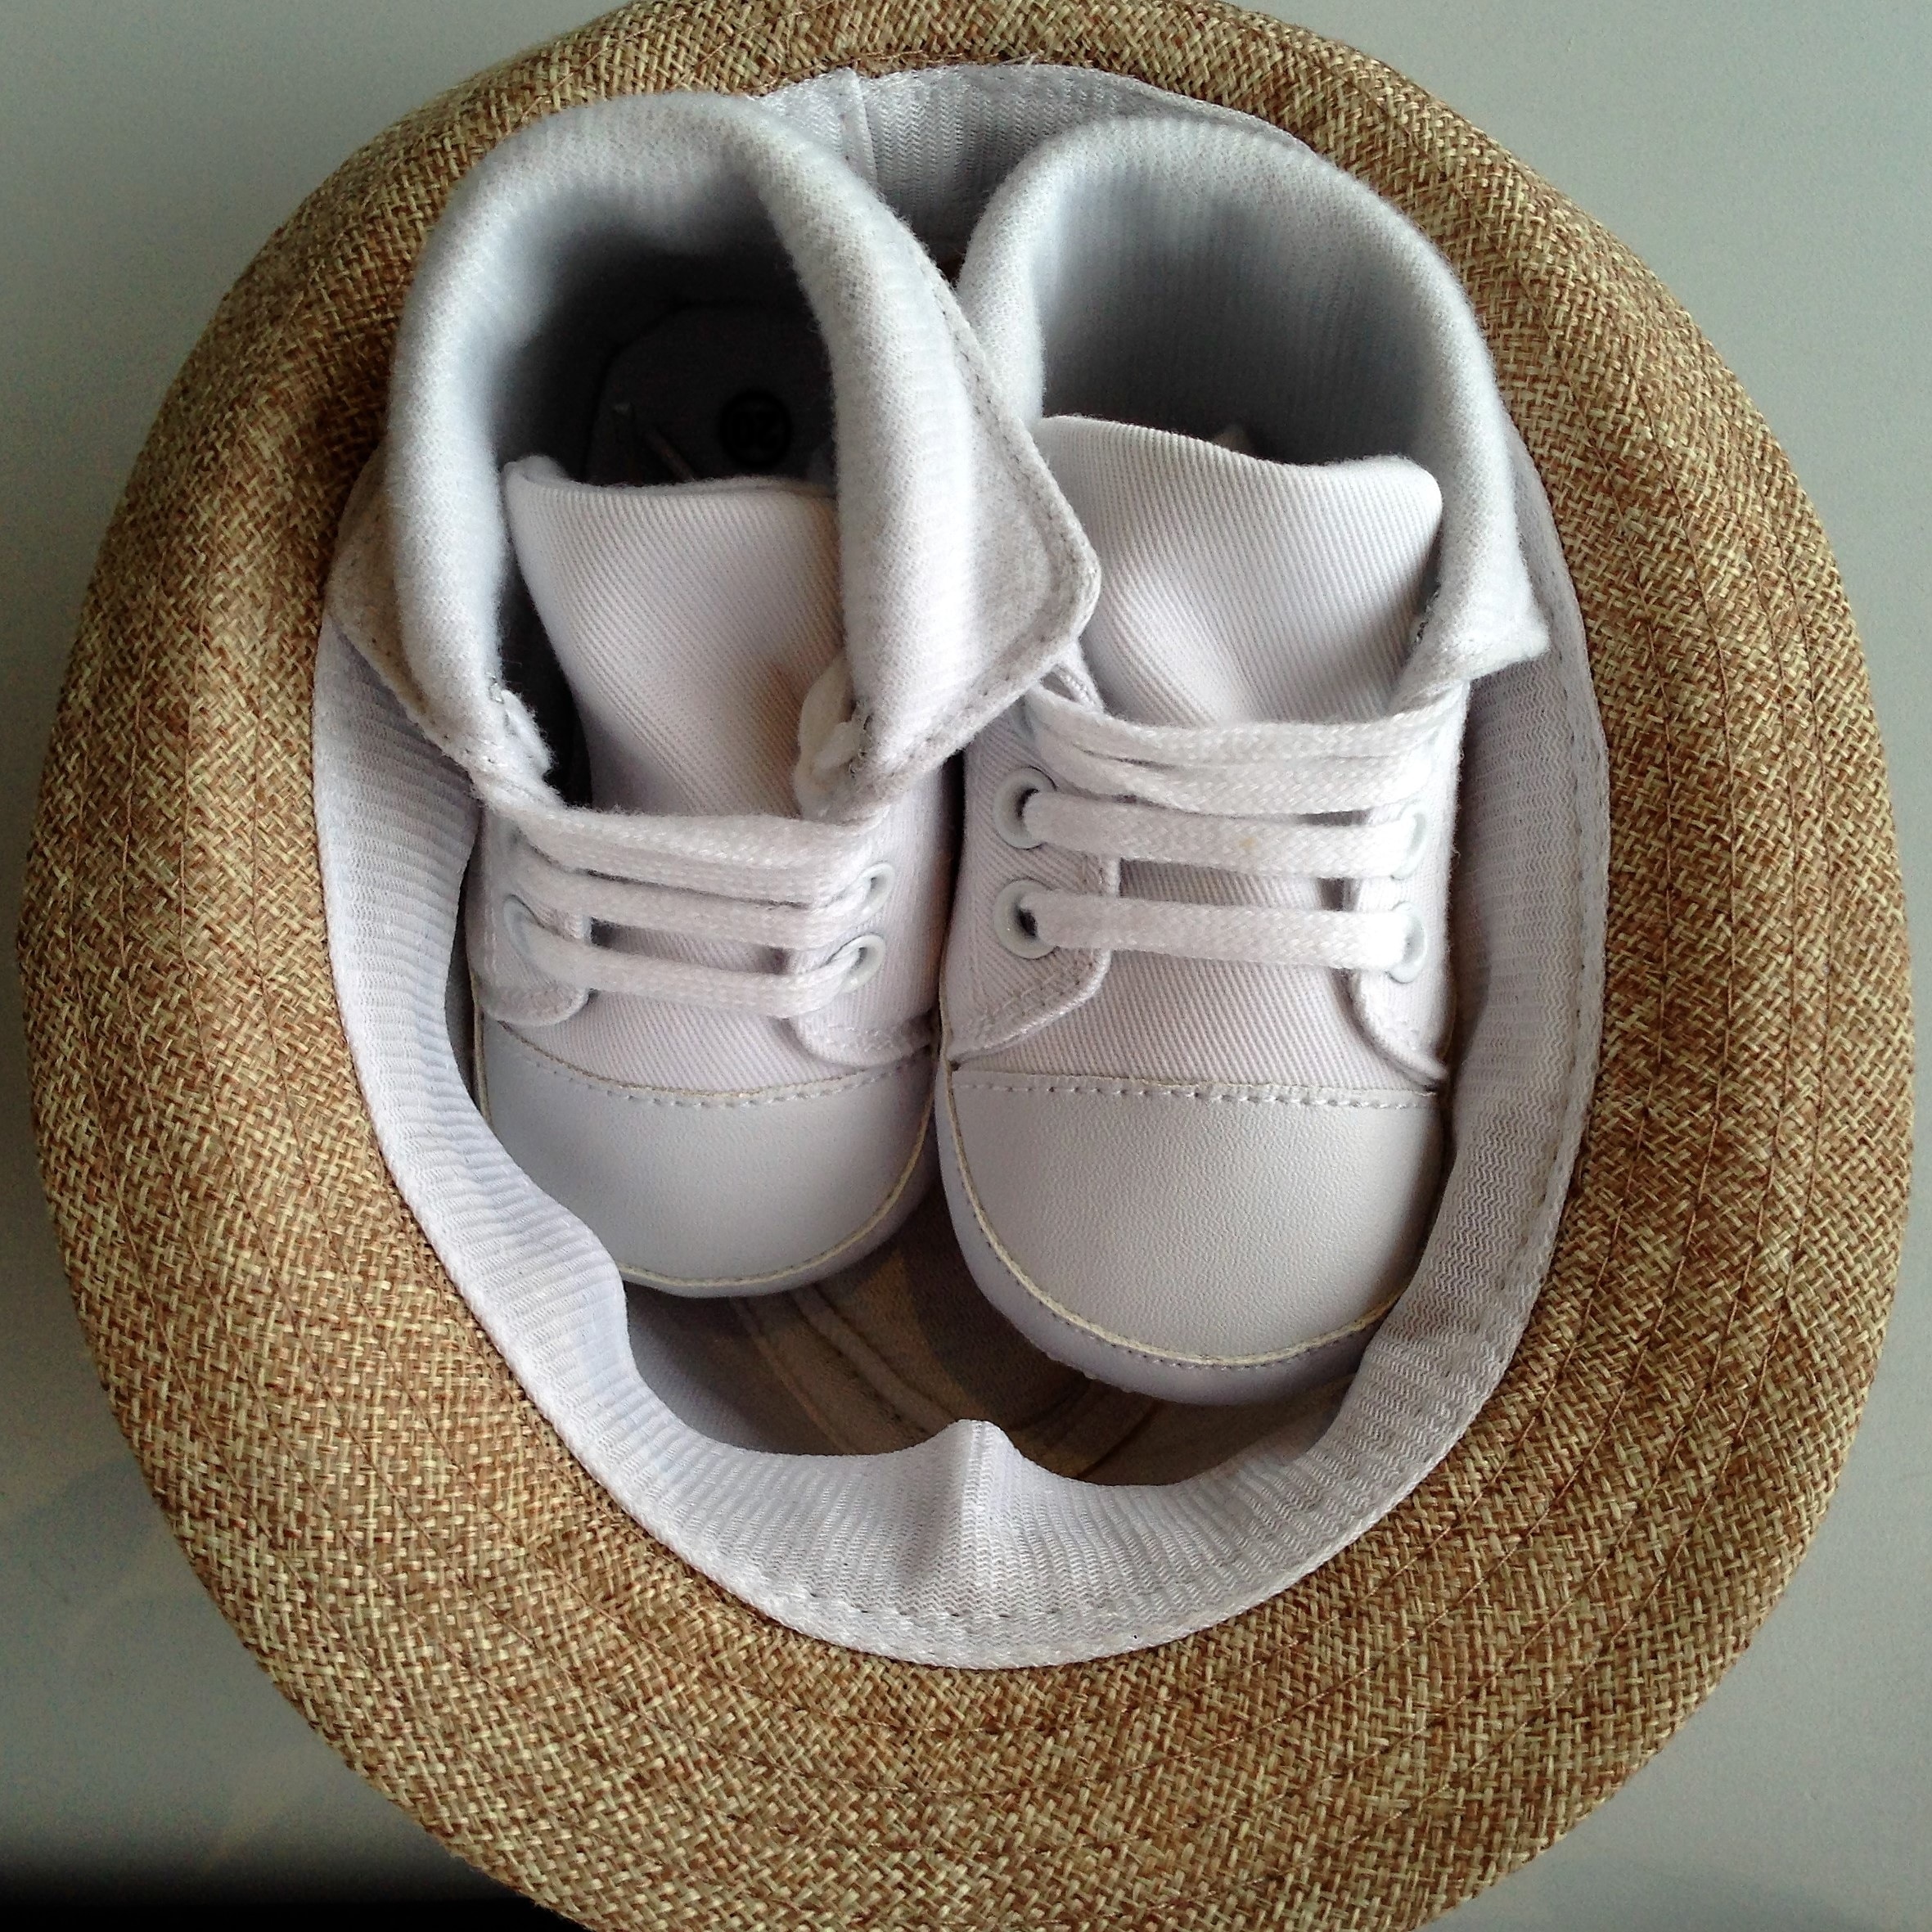 children's pair of white high top shoes